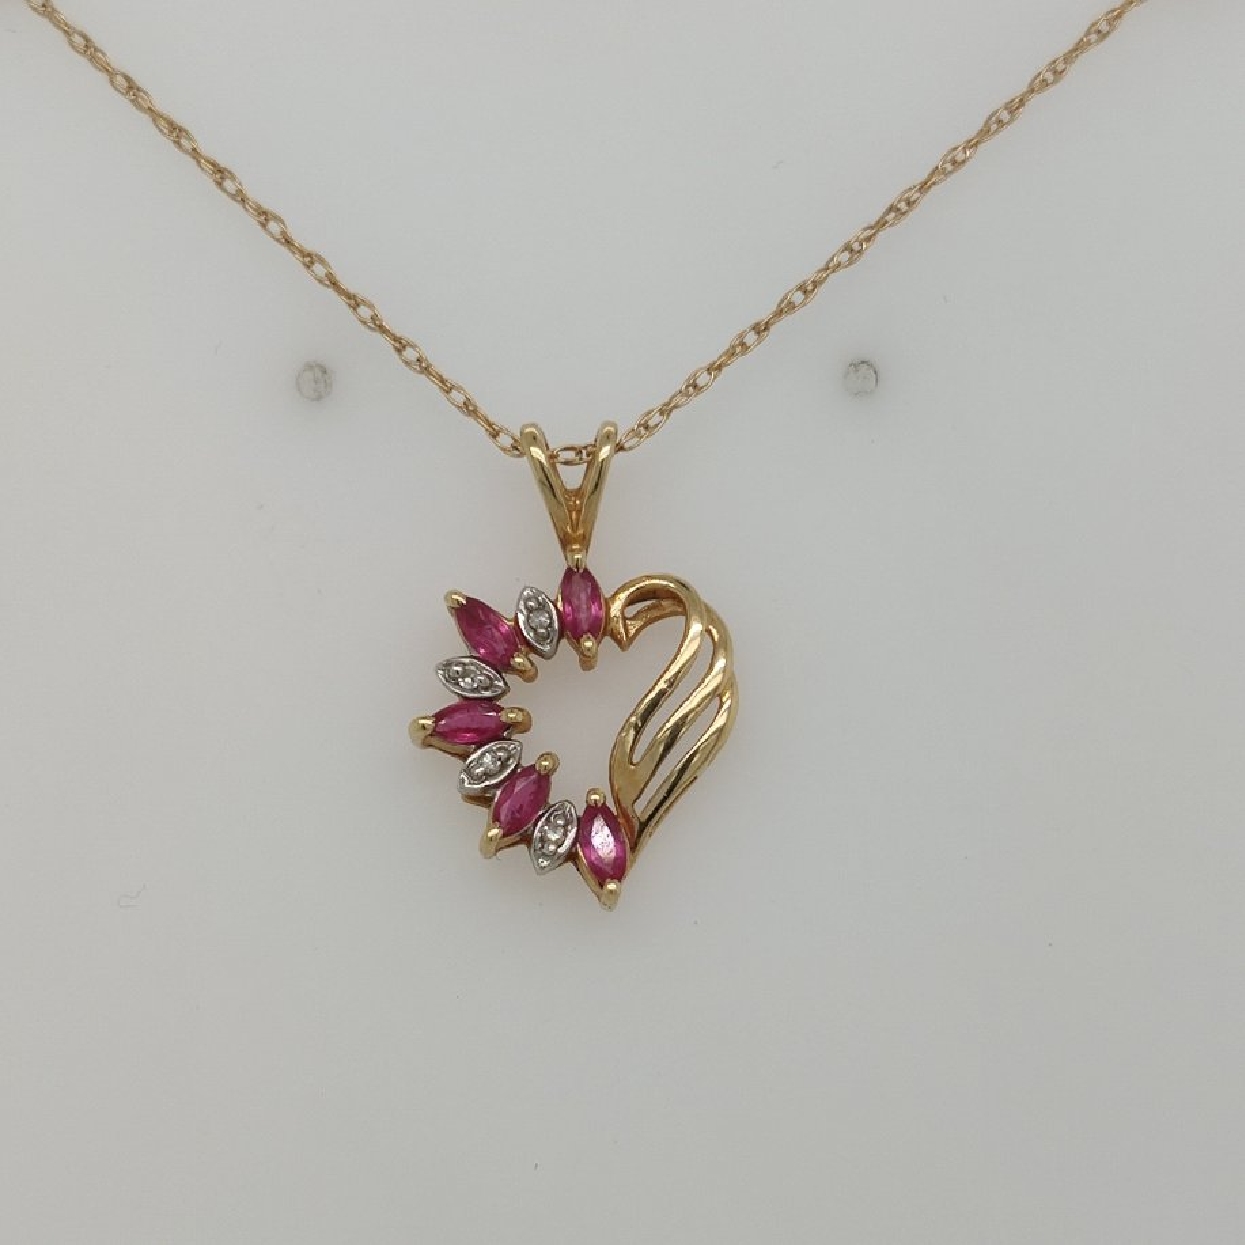 14K Yellow Gold Heart Pendant with Rubies and Diamonds on a 10K 20 inch Chain